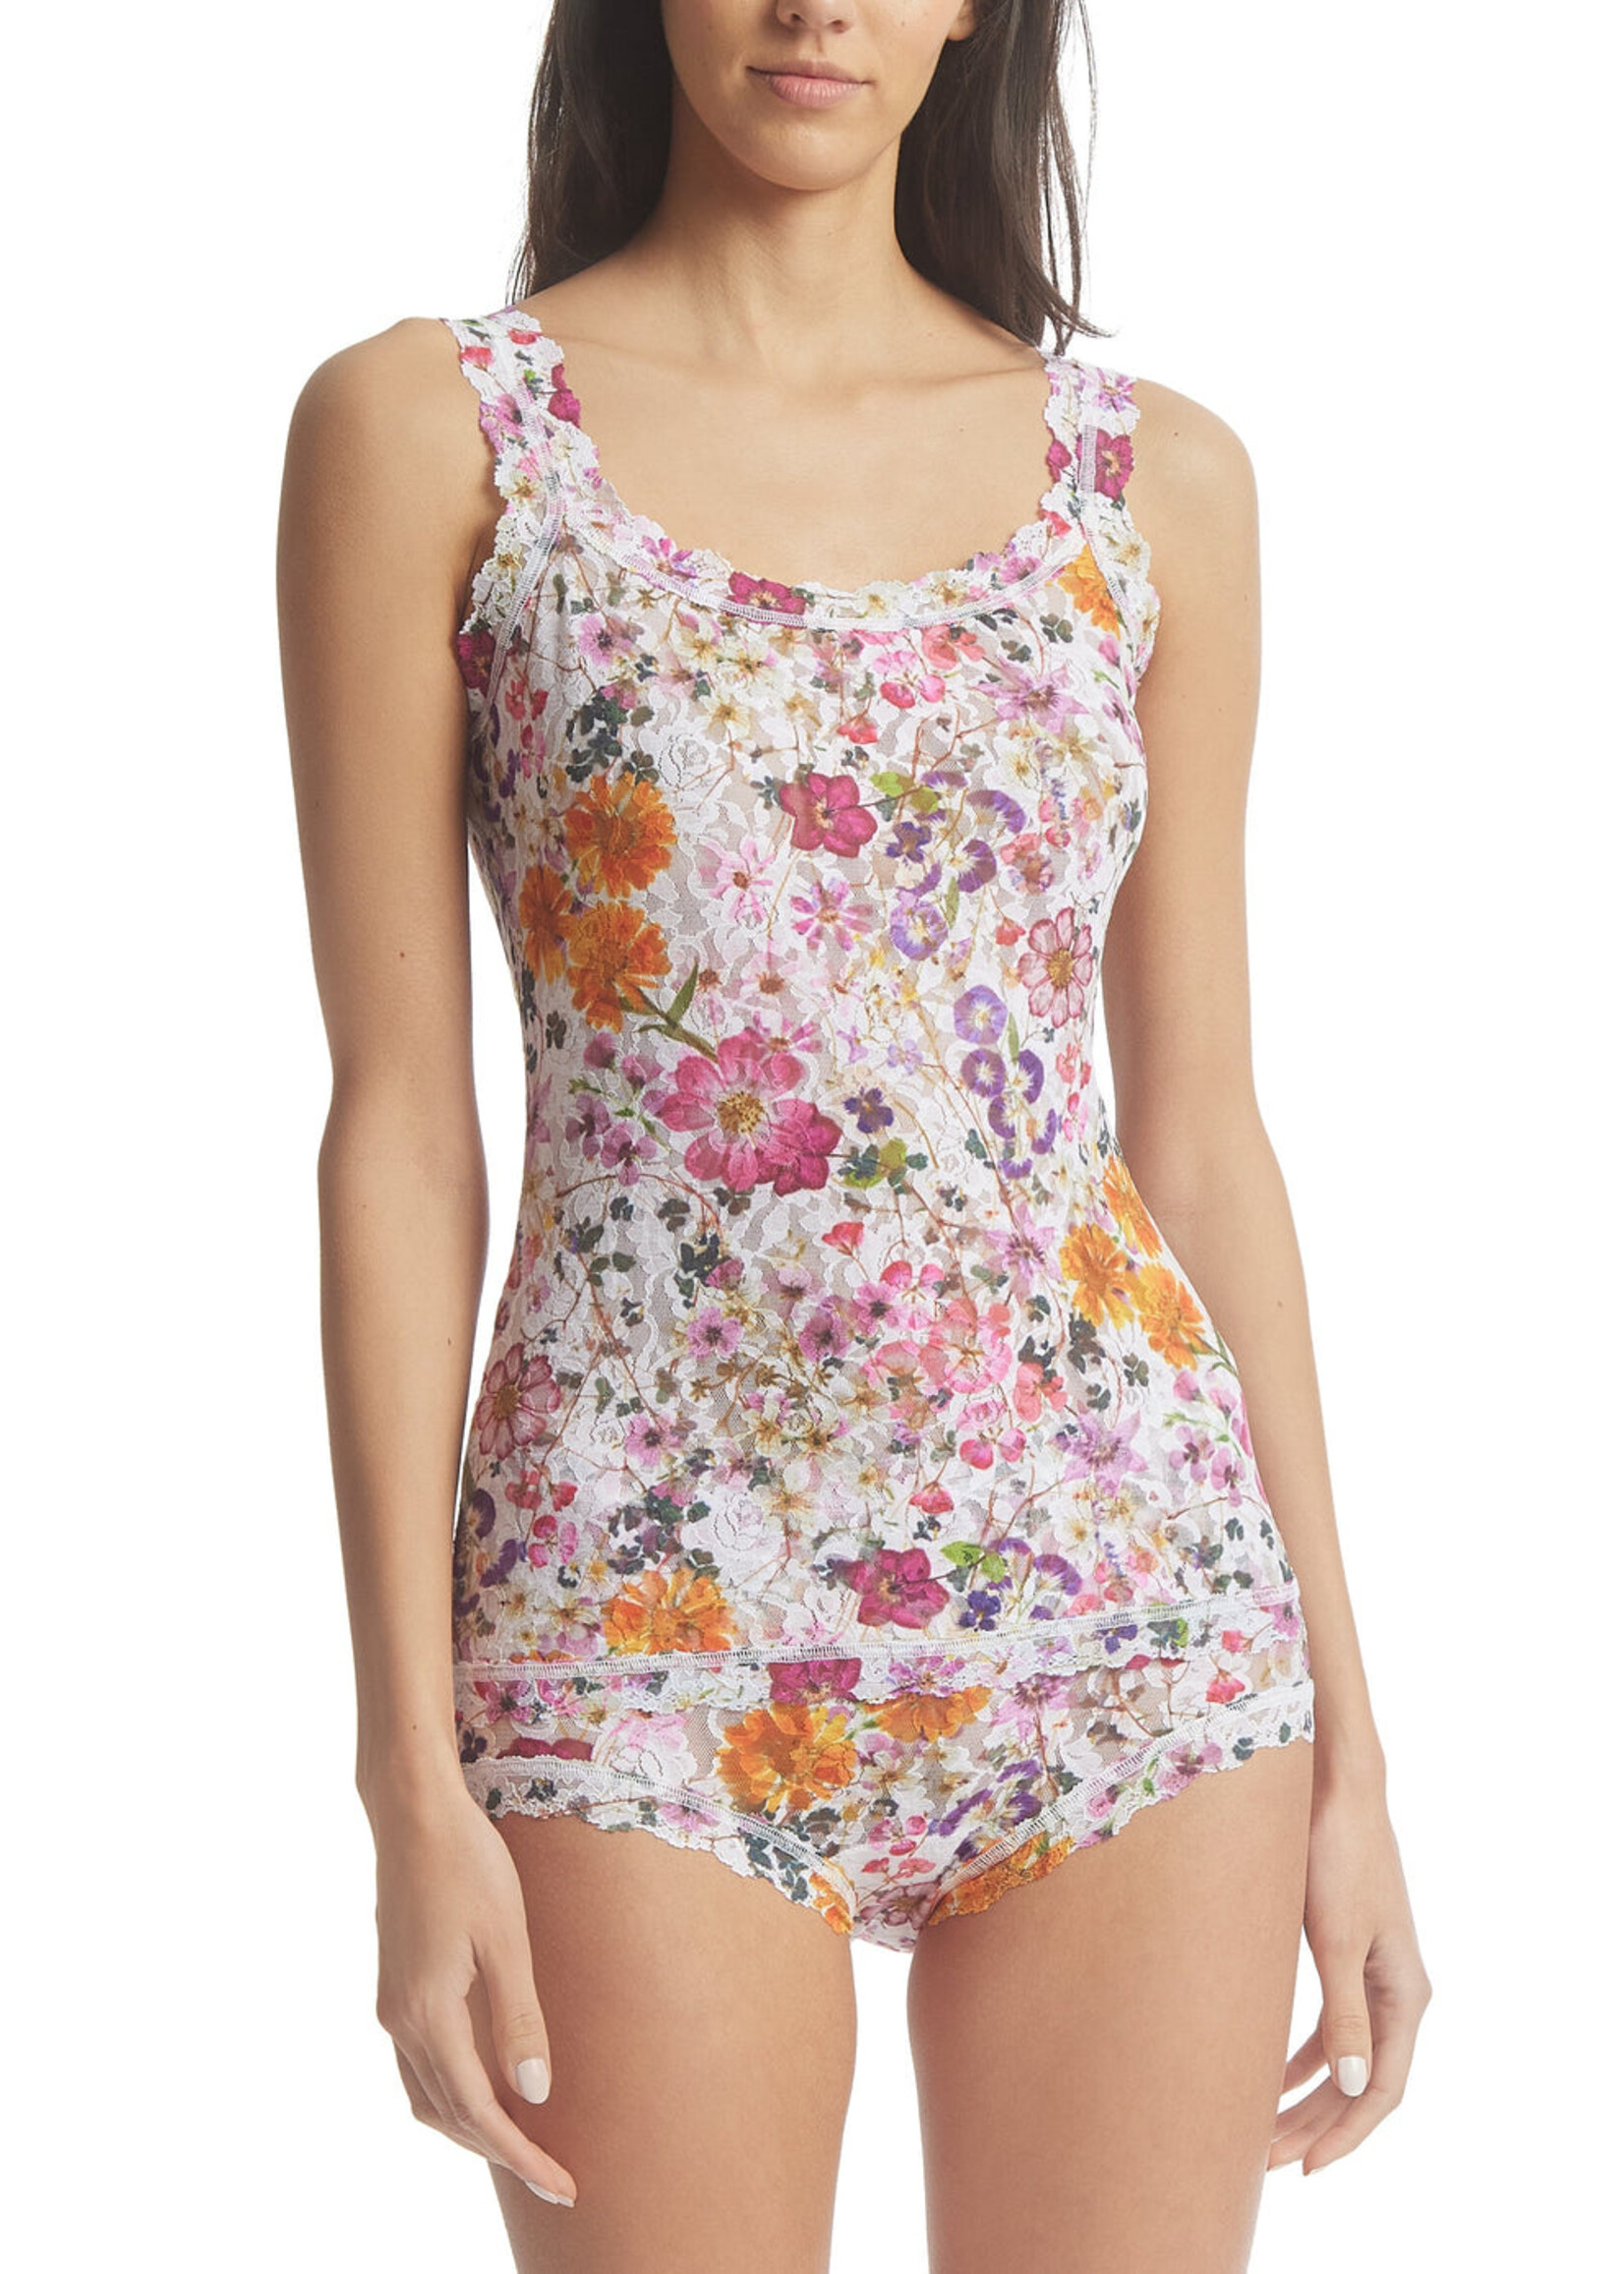 Hanky Panky Printed Unlined Cami